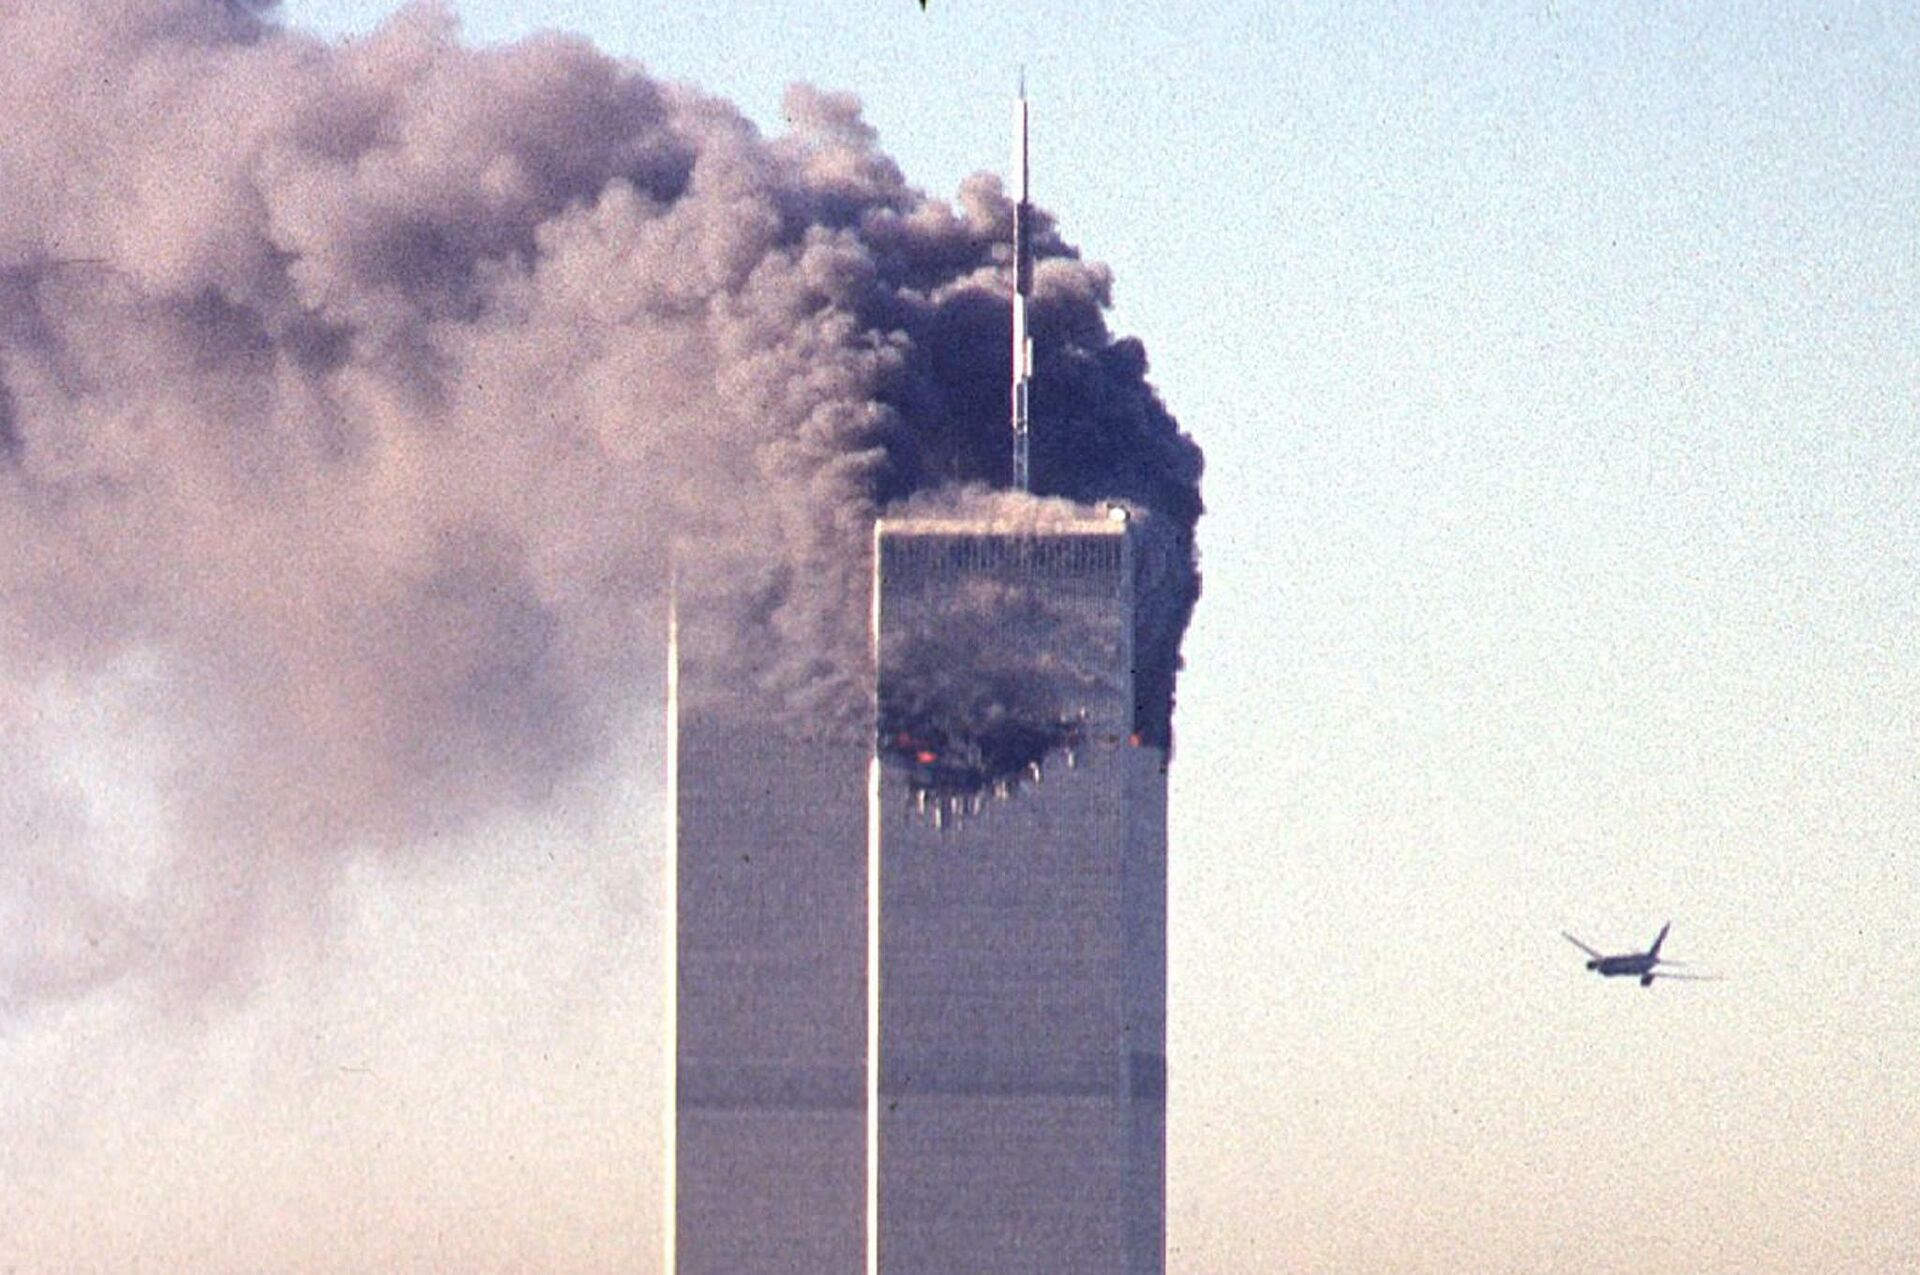 (FILES) In this file photo taken on September 11, 2001, a hijacked commercial aircraft approaches the twin towers of the World Trade Center shortly before crashing into the landmark skyscraper in New York.  - Sputnik International, 1920, 17.09.2021